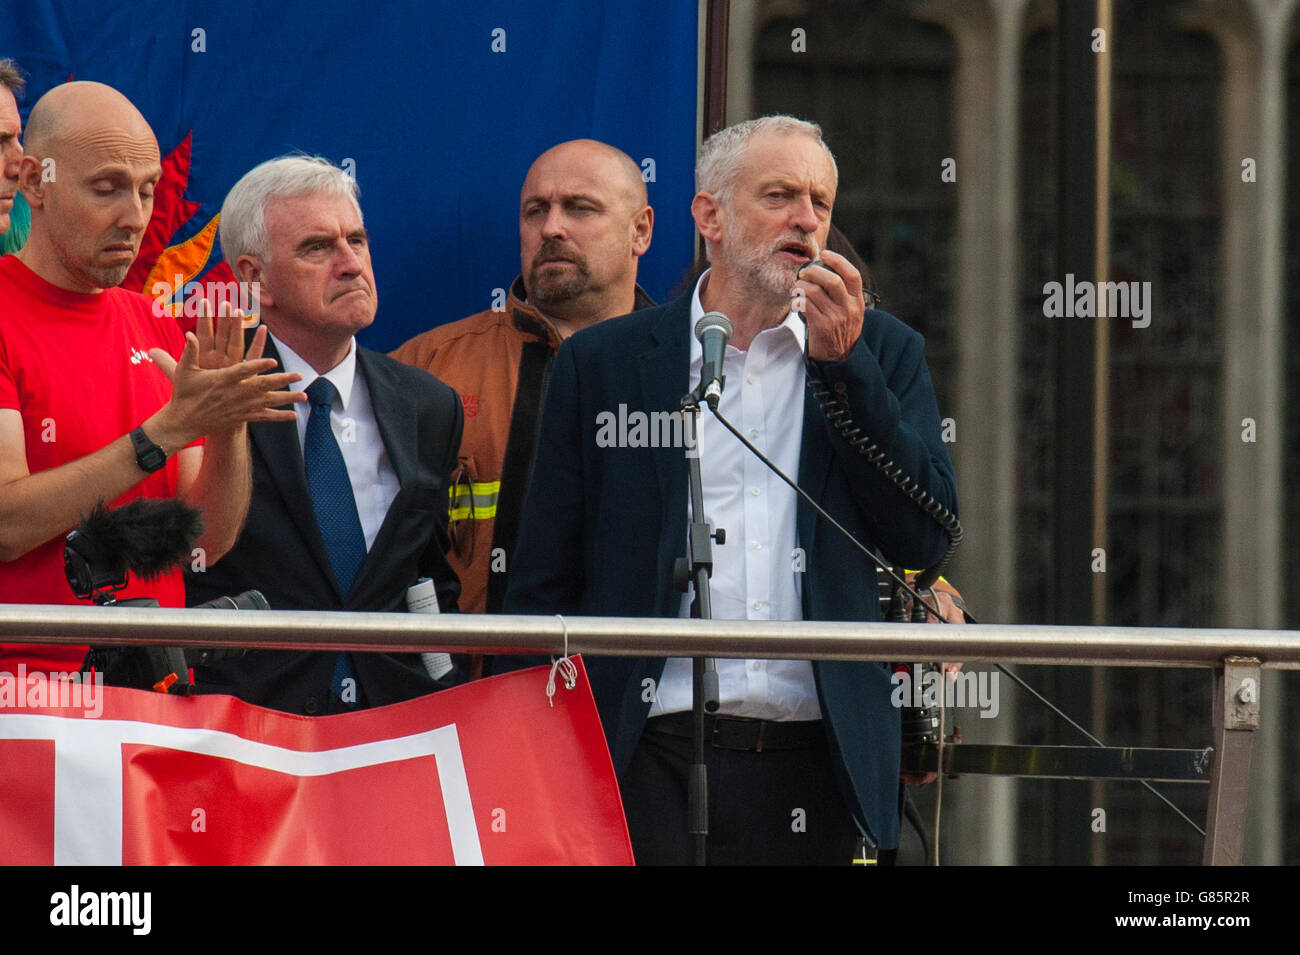 Labour leader Jeremy Corbyn speaks in Parliament Square, alongside Shadow Chancellor John McDonnell (second left), where the Momentum campaign group are holding a Keep Corbyn demonstration. Stock Photo